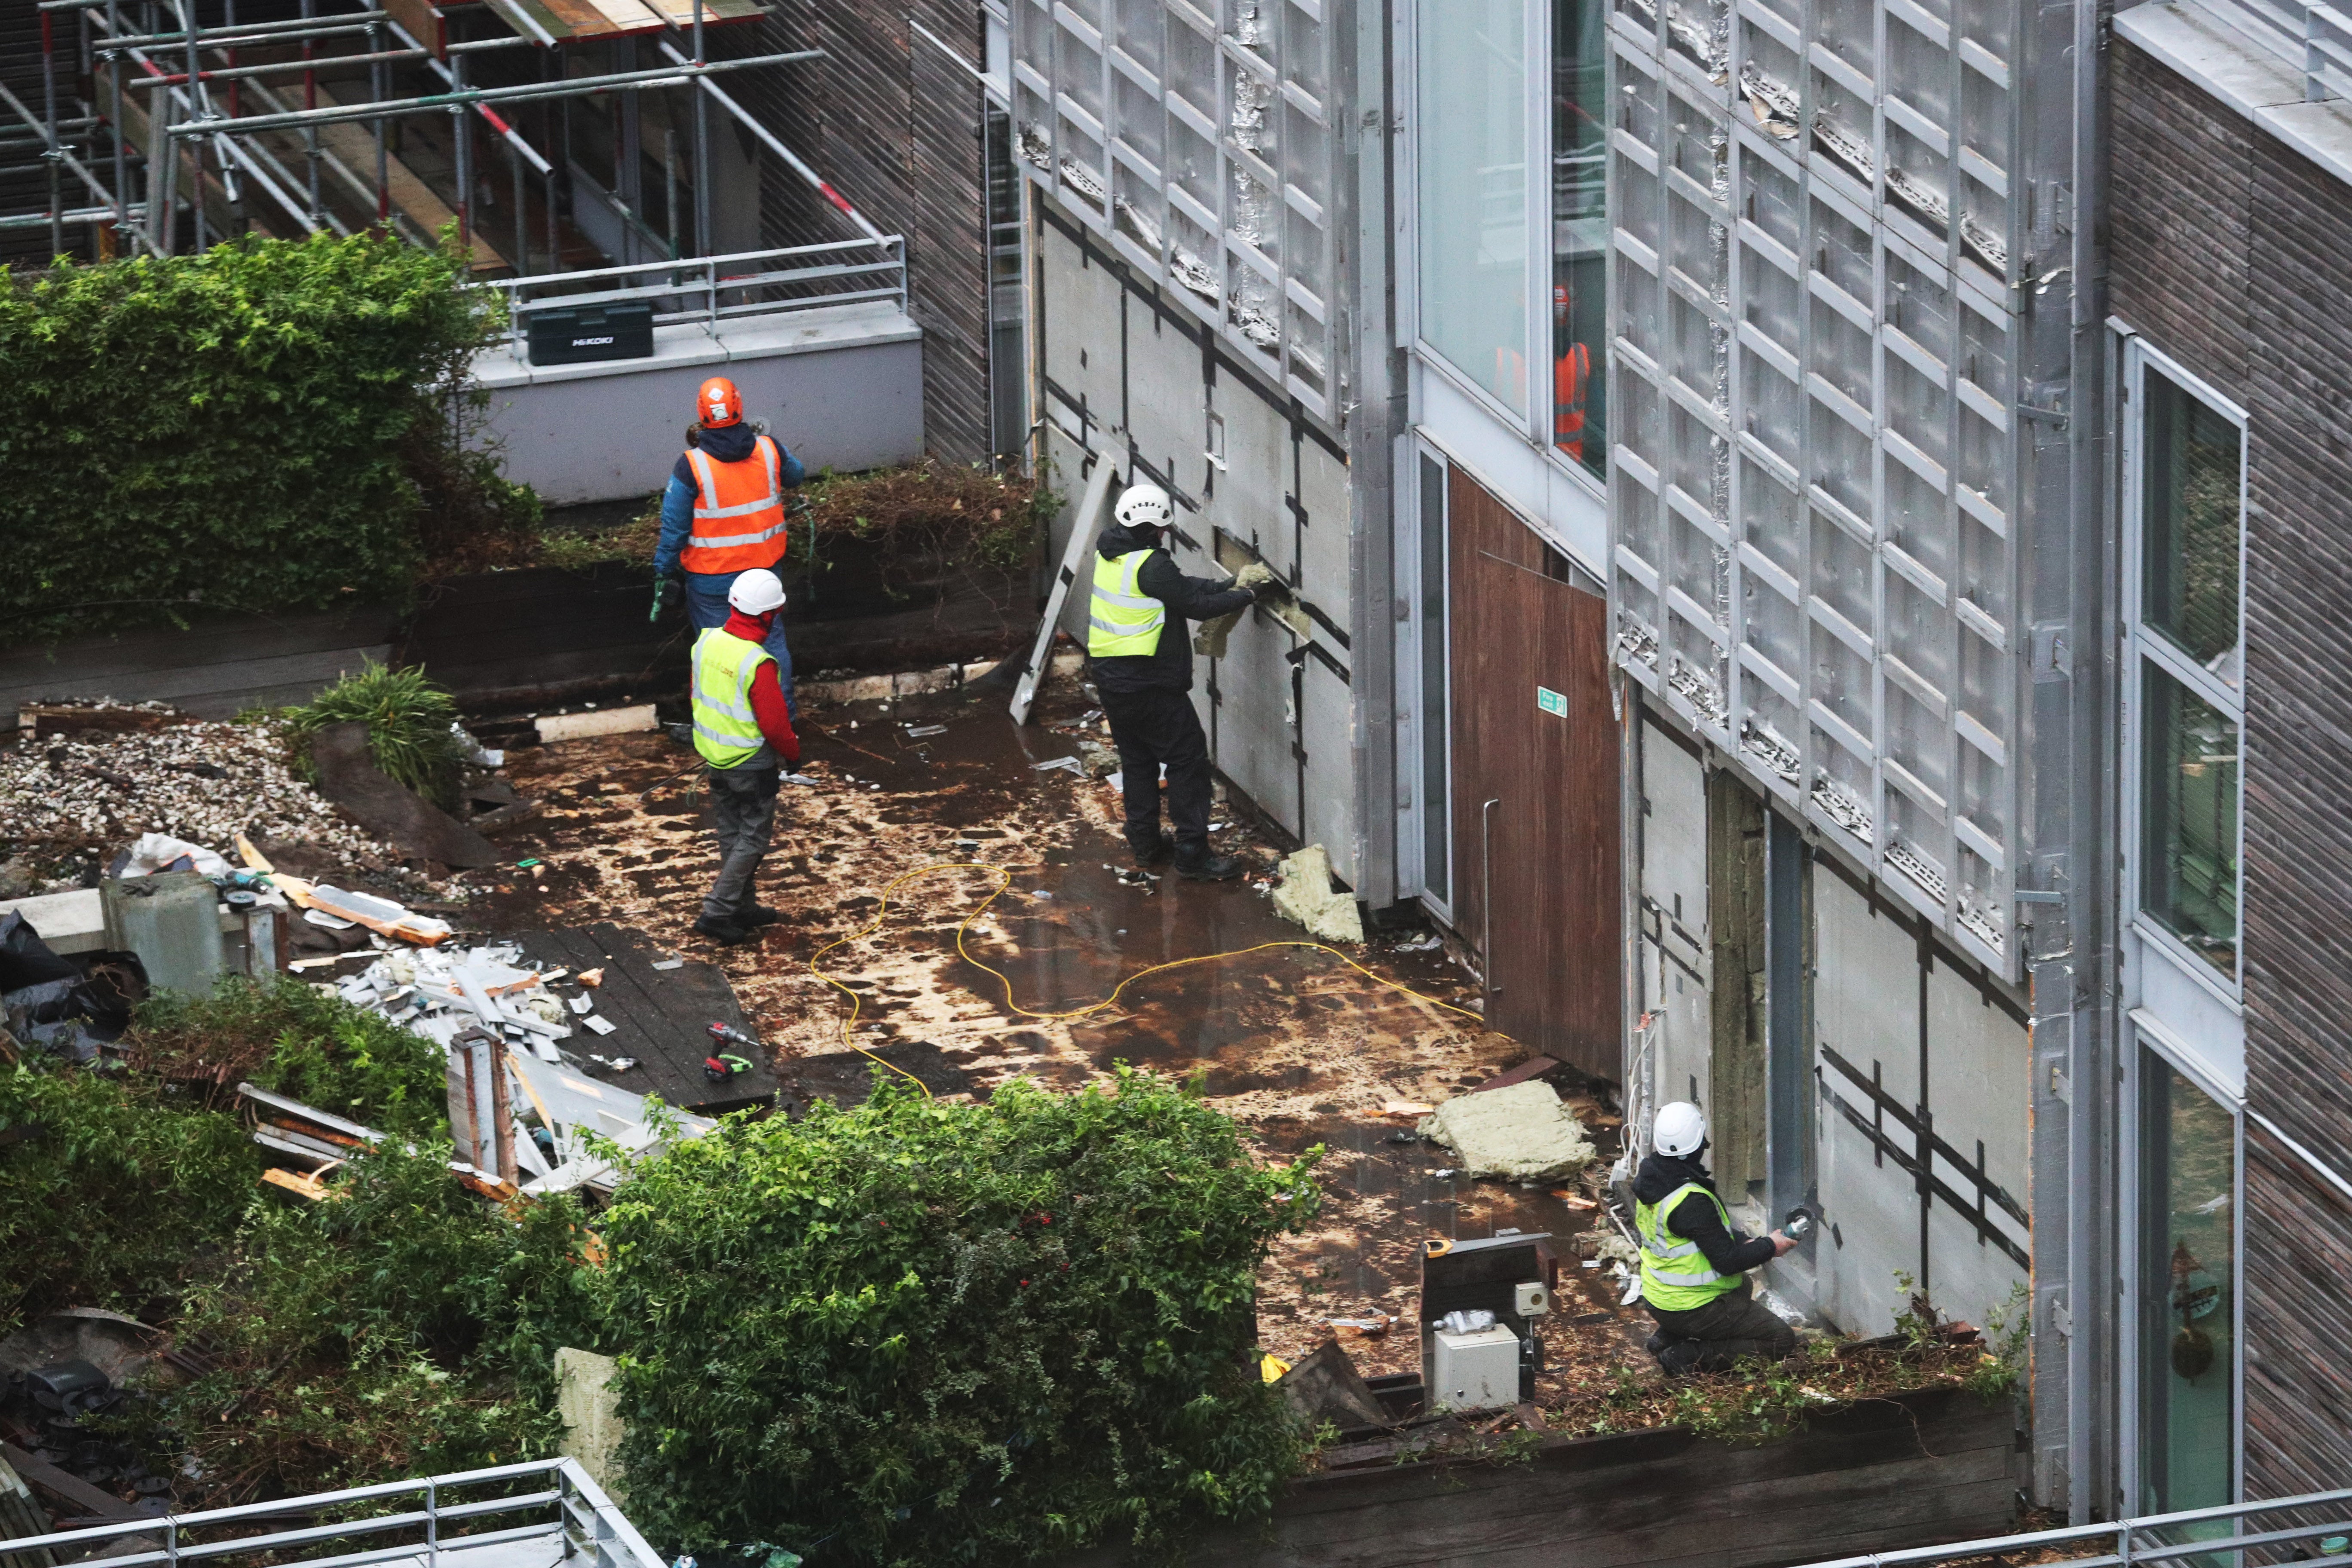 Contractors undertake works at a residential property in Paddington (PA)